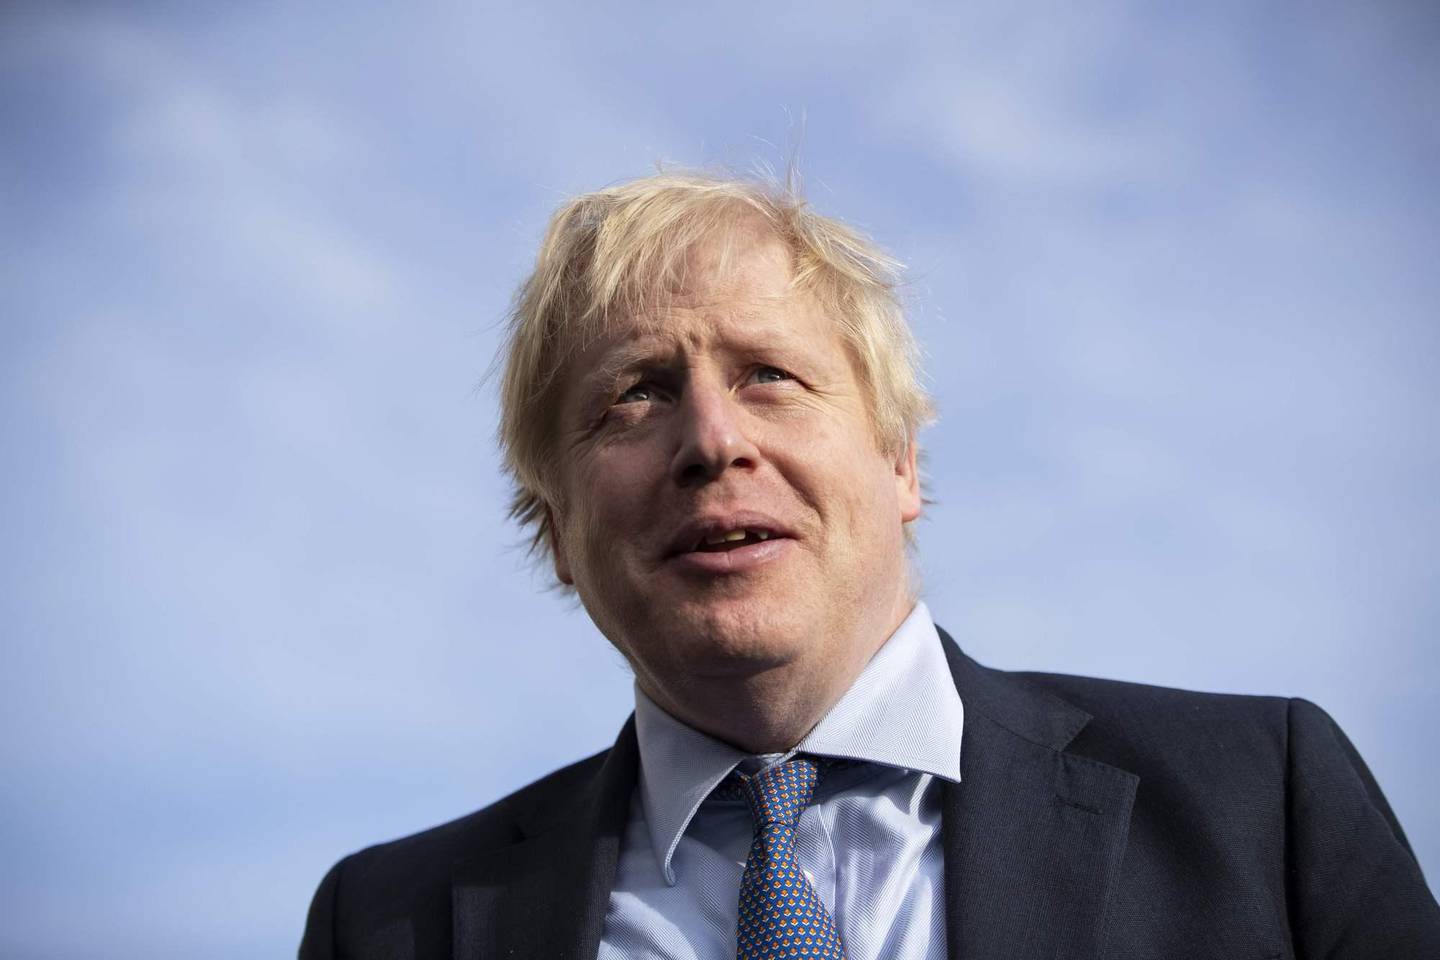 Britain's Prime Minister and Conservative Party leader, Boris Johnson visits Chulmleigh College while campaigning for the general election in Chulmleigh, Devon, southwest England, on November 28, 2019. - Britain will go to the polls on December 12, 2019 to vote in a pre-Christmas general election. (Photo by Dan Kitwood / POOL / AFP)